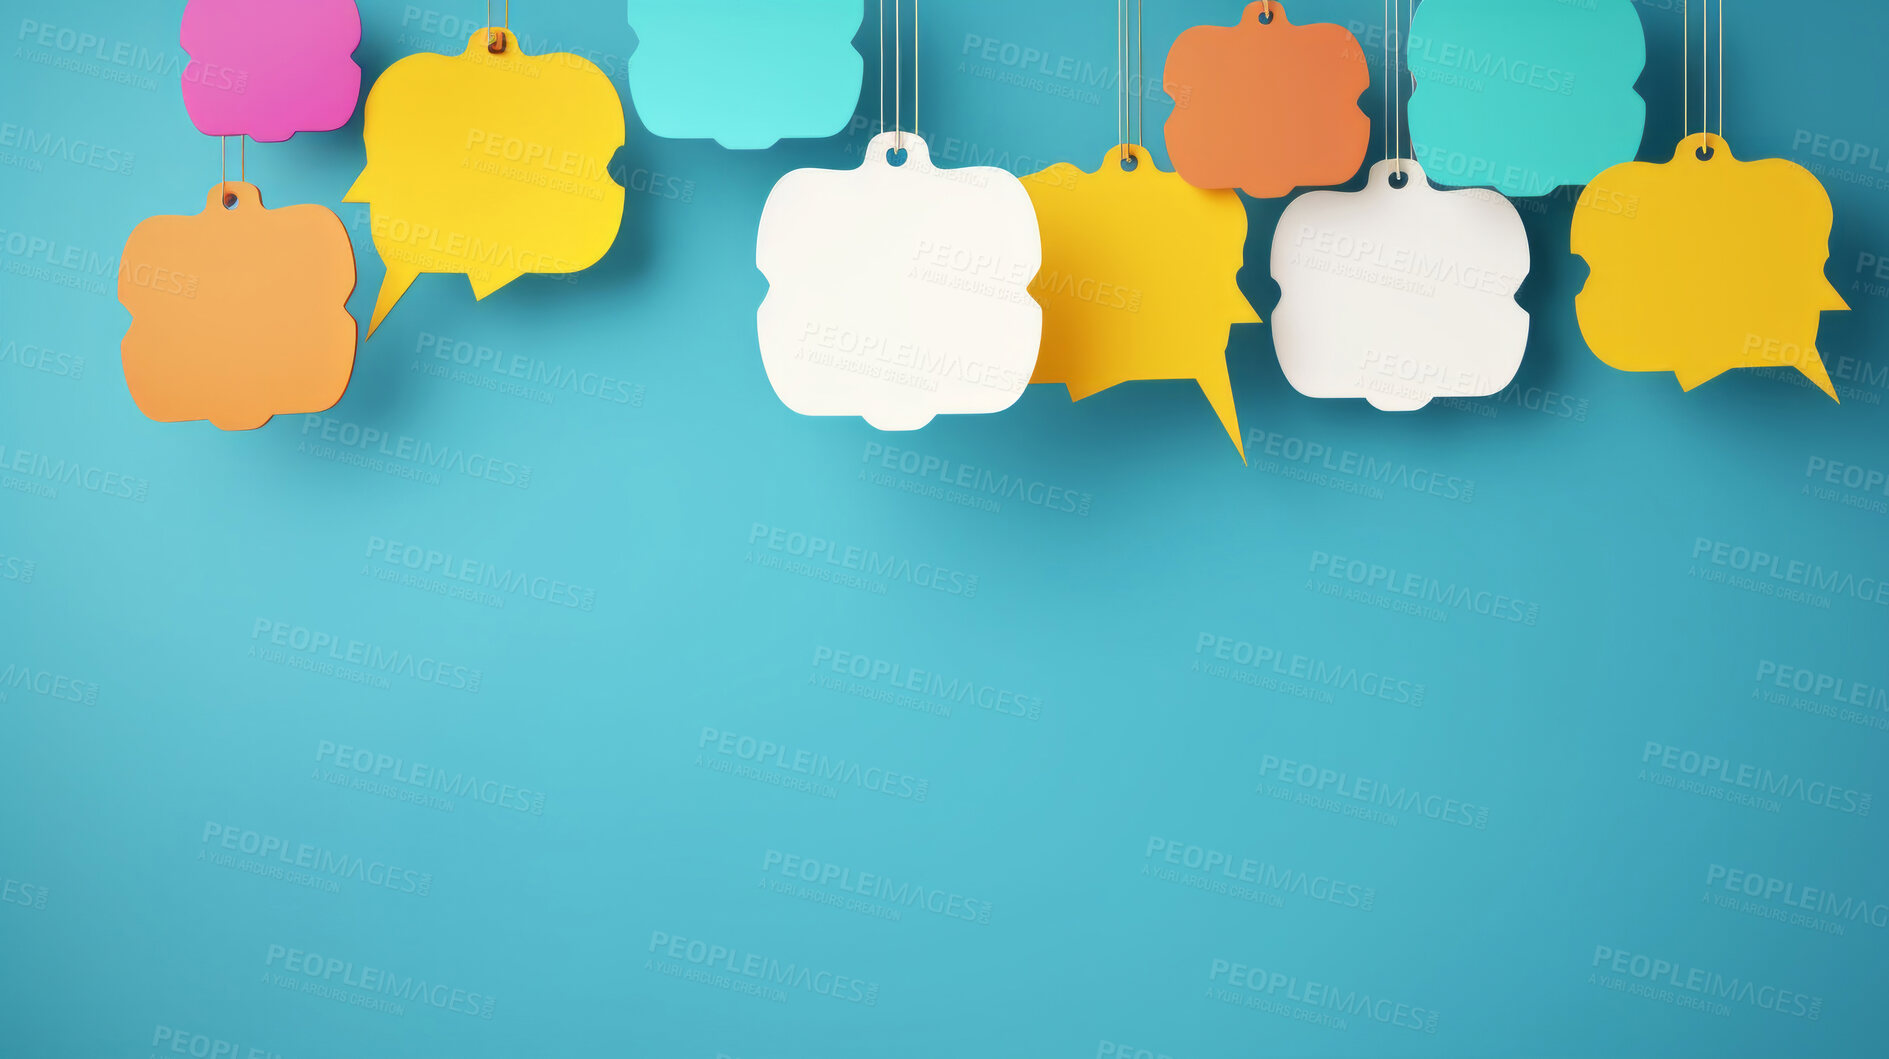 Buy stock photo Colorful hanging speech bubbles. Social media notification chat icon. Copyspace dialogue box